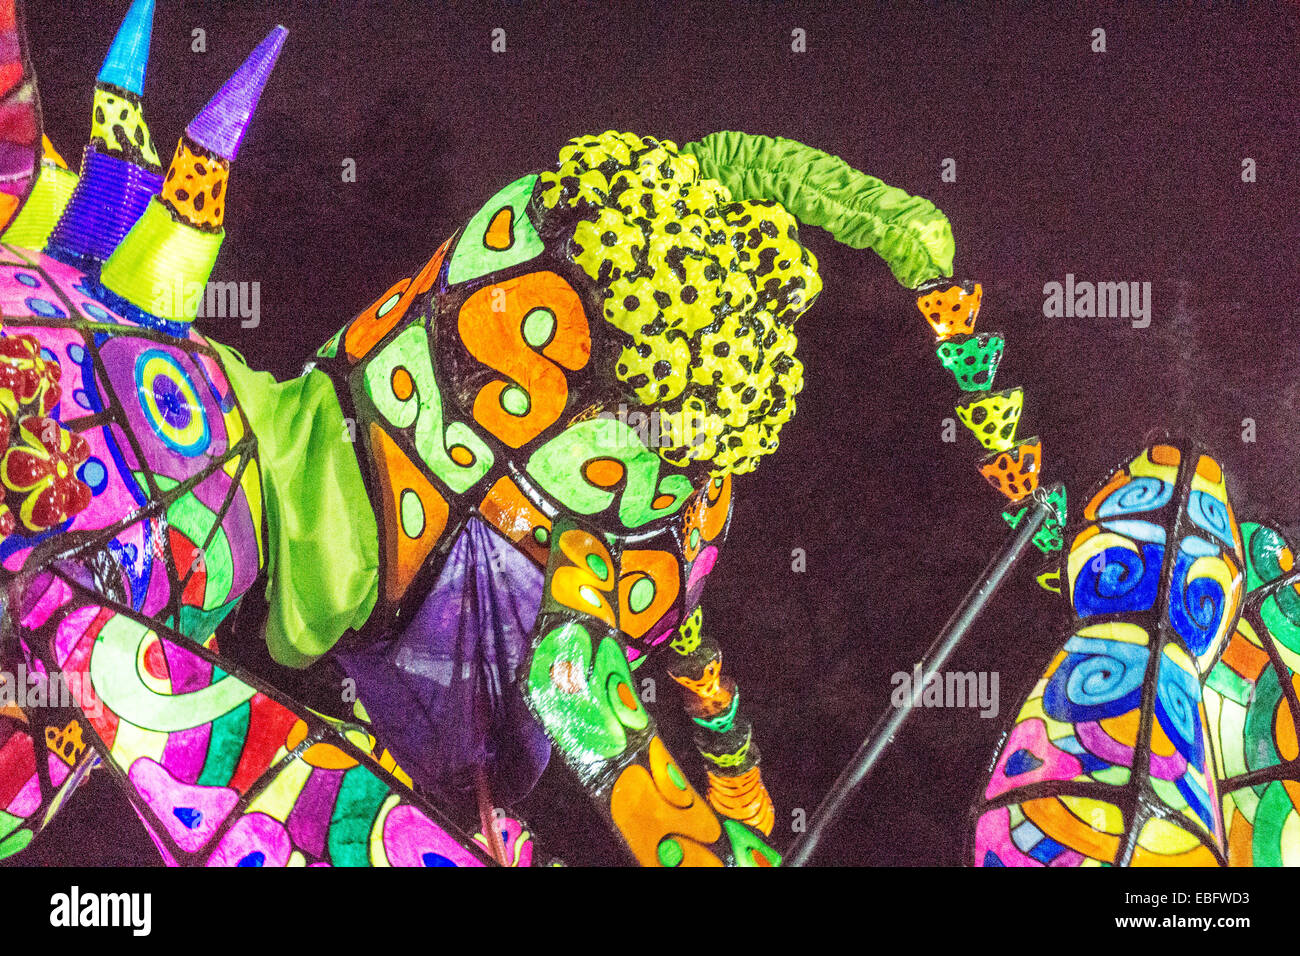 Mexico City, Mexico, 29 November, 2014: illuminated monsters from parade of Alebrijes Monumentales, fantastic creatures, arrive at Luis Cabrera Square for judging after parading through the night streets of the Orizaba & Roma neigborhoods Credit:  Dorothy Alexander/Alamy Live News Stock Photo